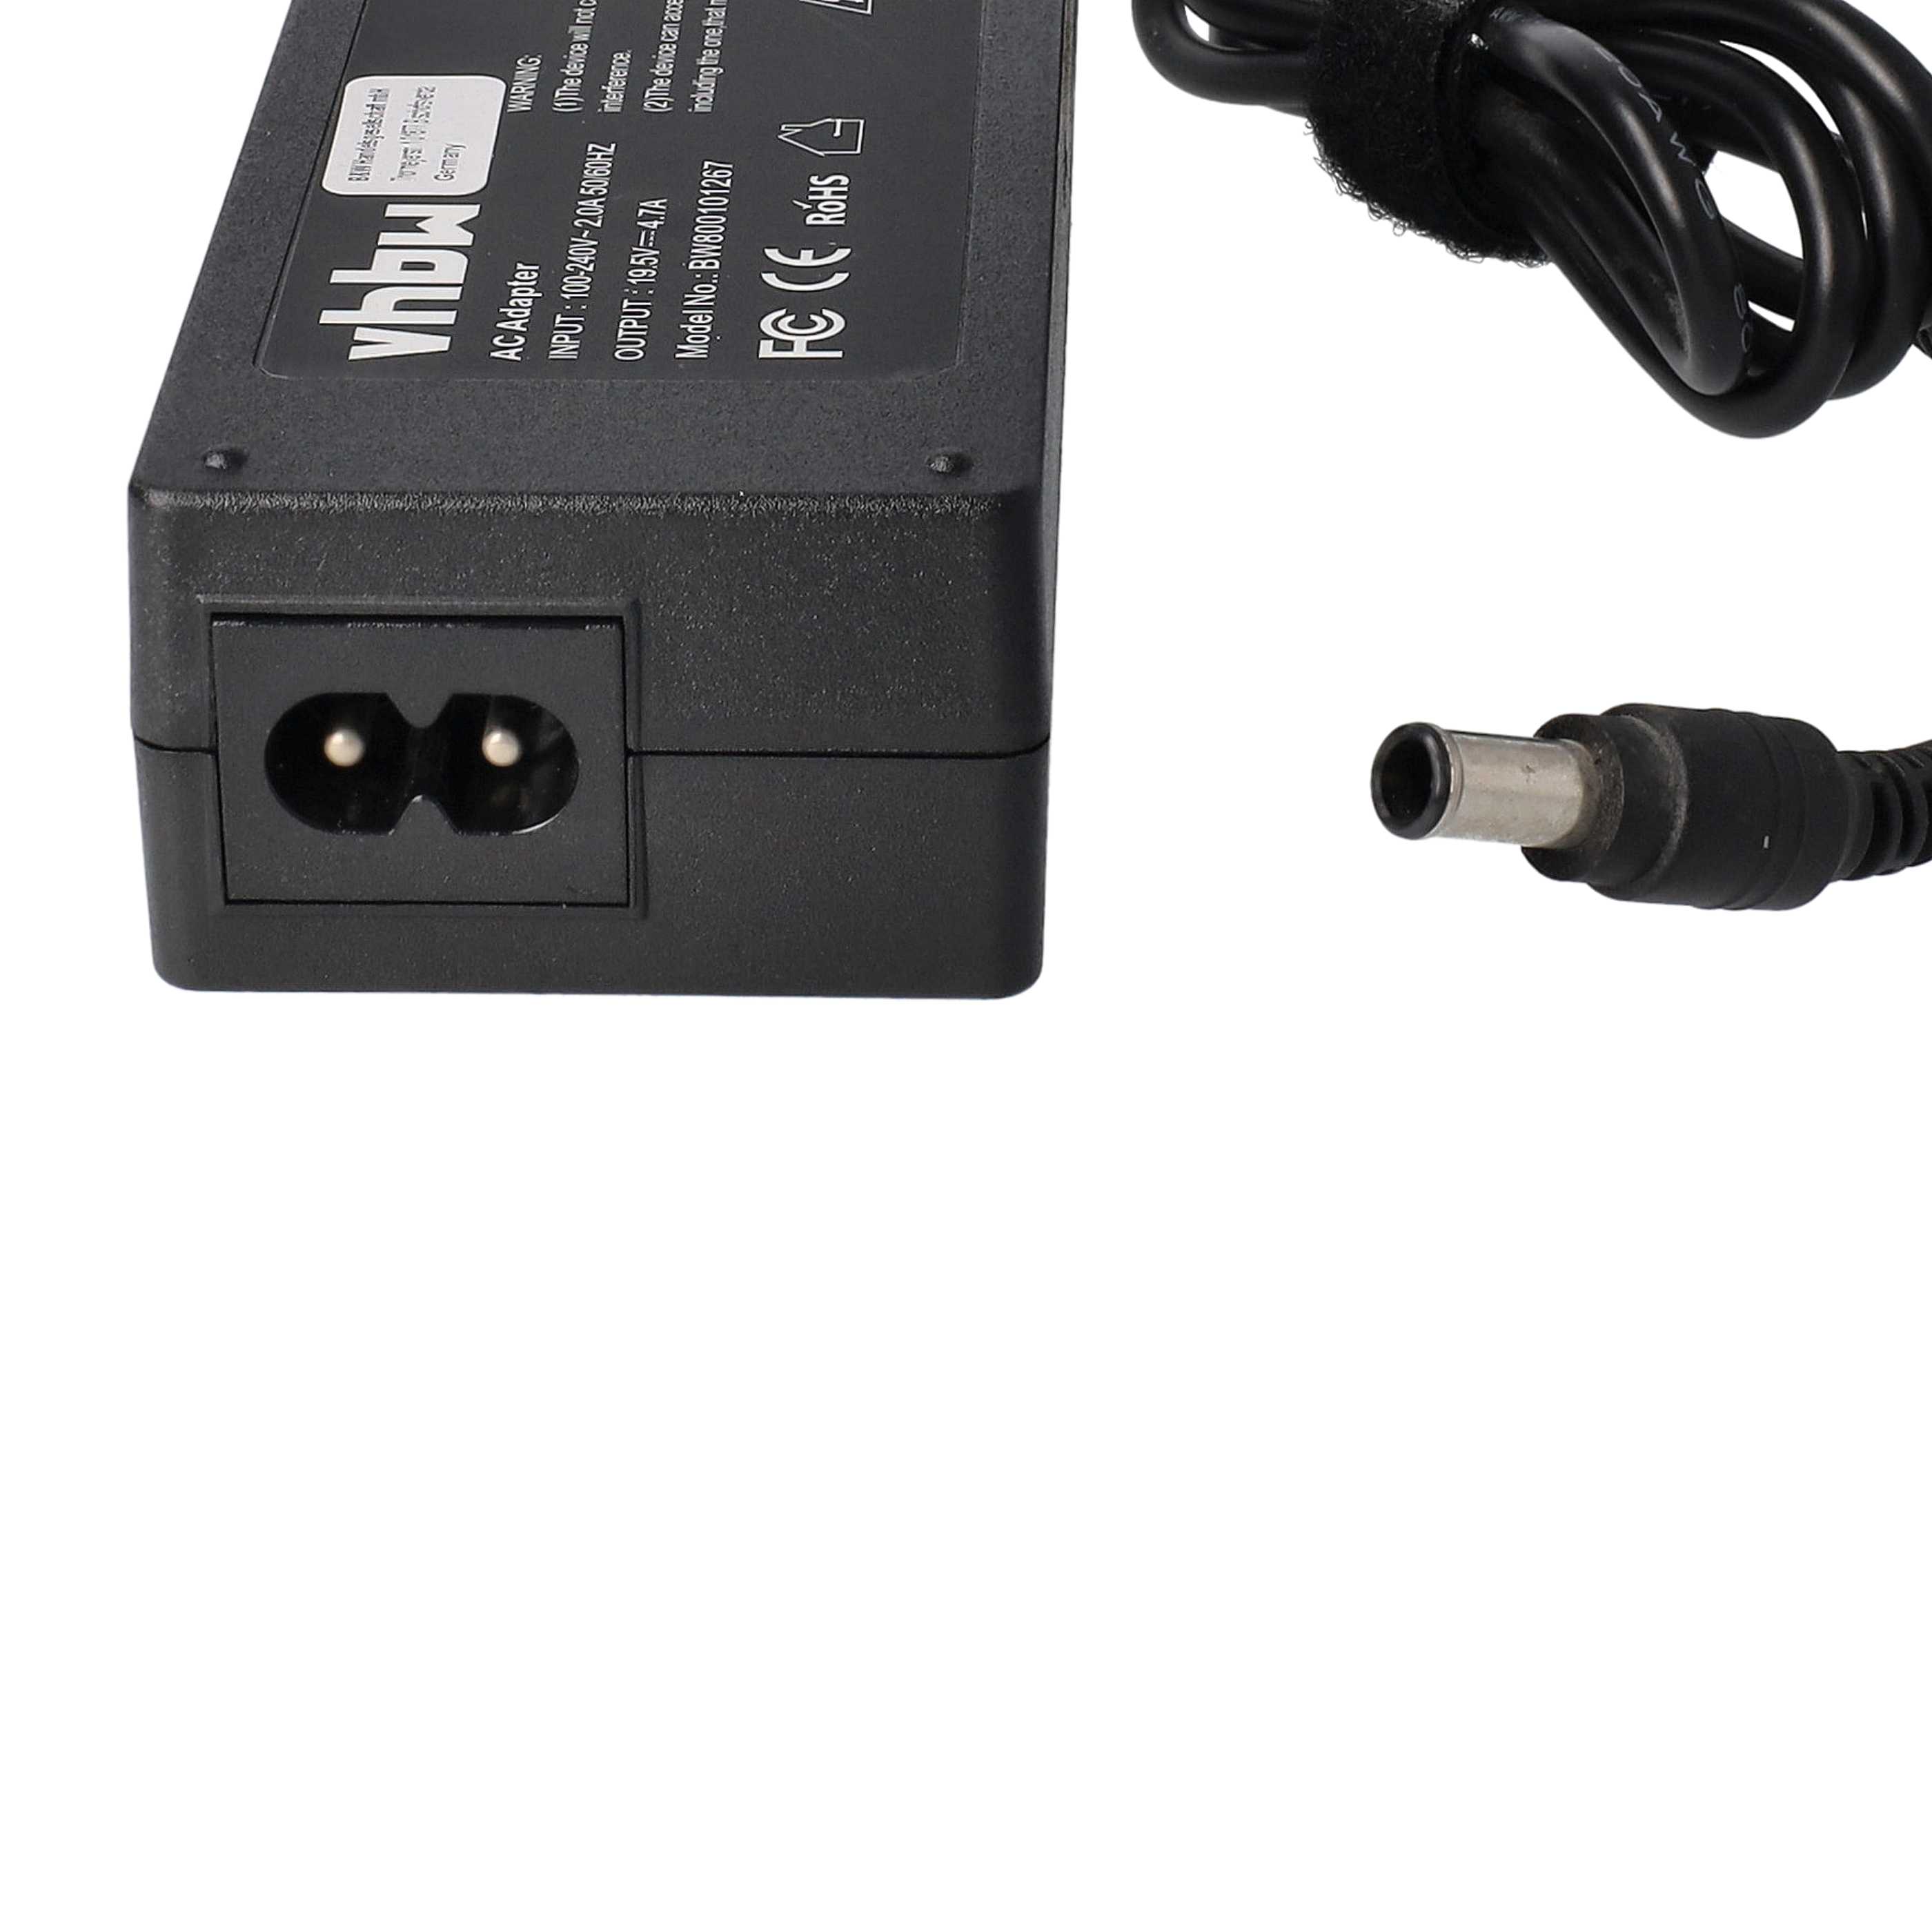 Mains Power Adapter replaces Sony PCGA-AC19V, PCGA-AC19V1, PCGA-AC19V10, PCGA-AC19V2 for SonyNotebook, 91 W